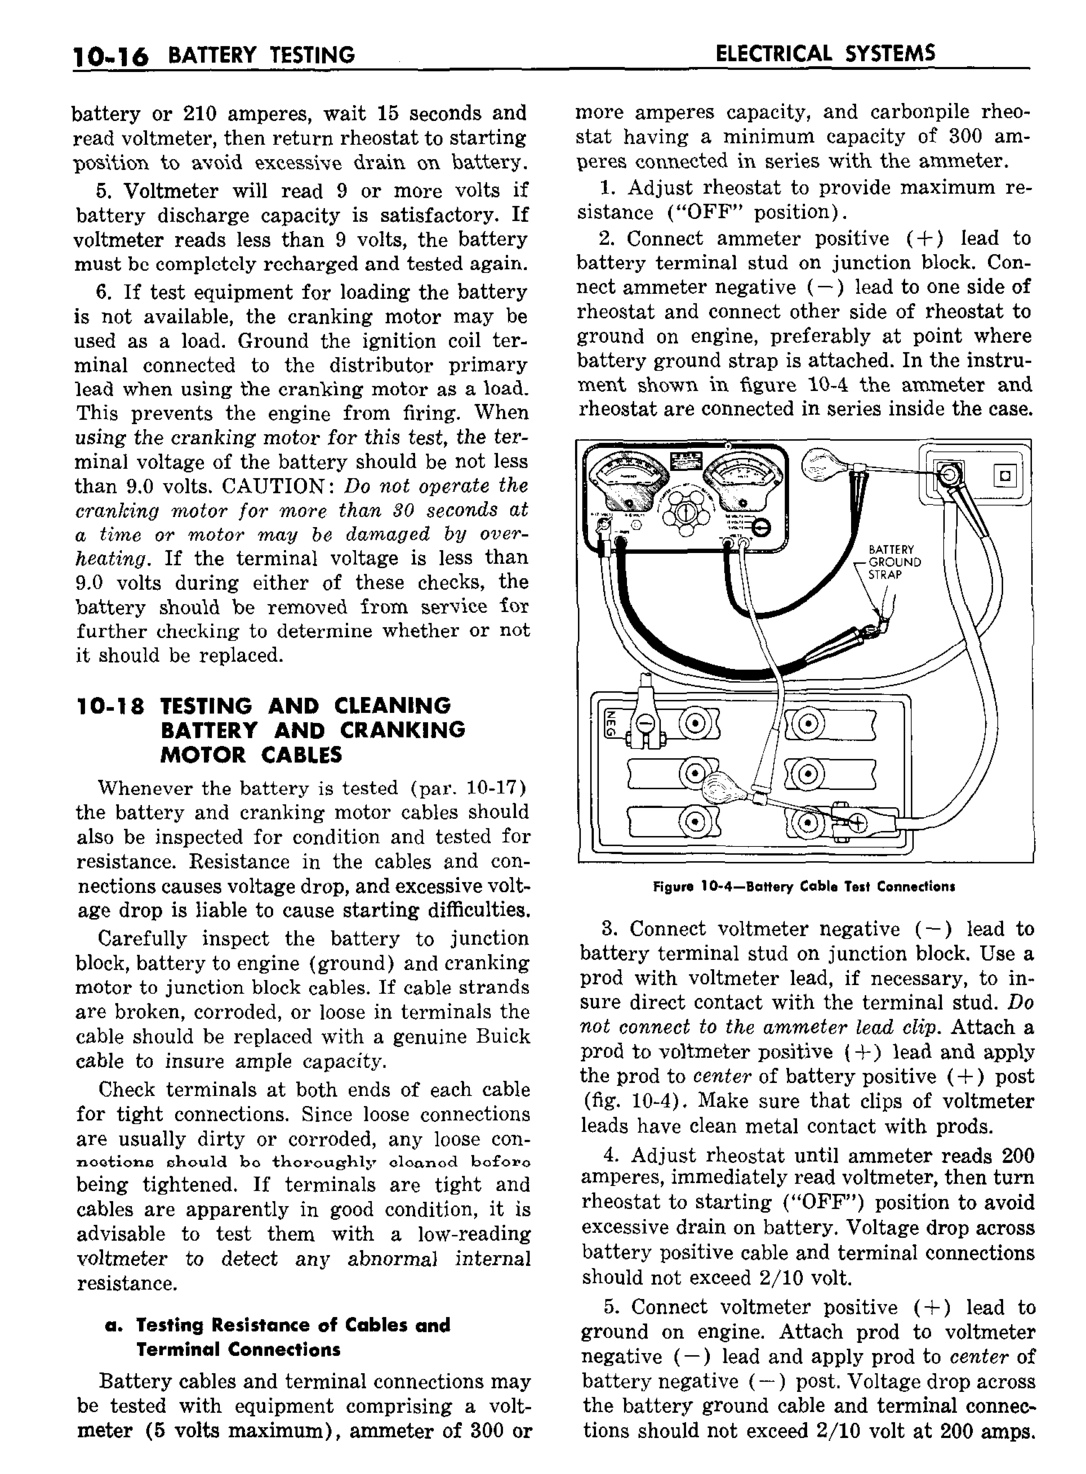 n_11 1959 Buick Shop Manual - Electrical Systems-016-016.jpg